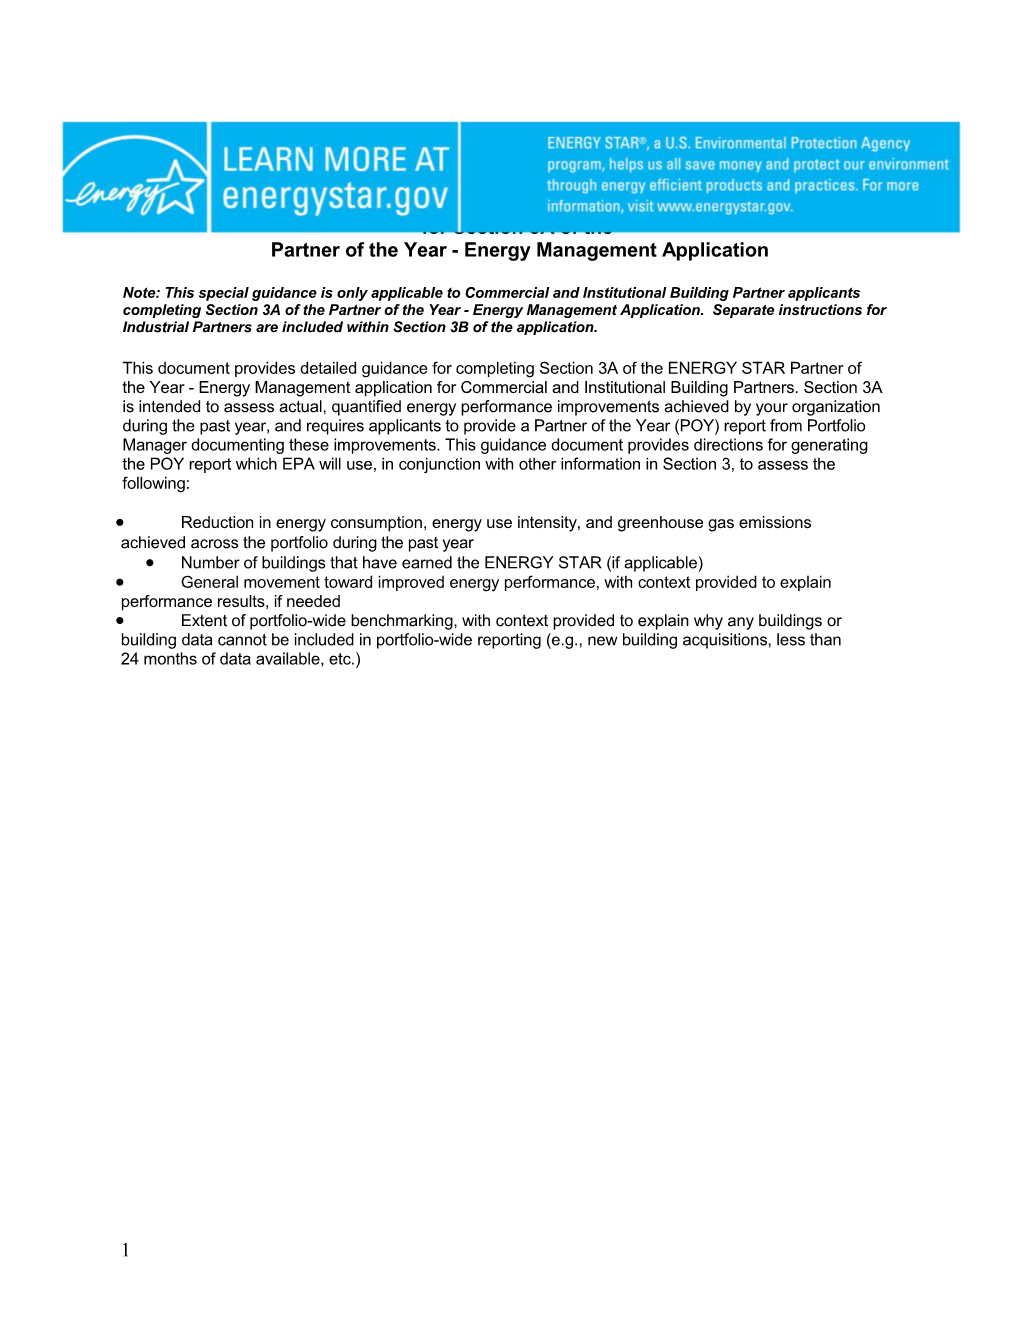 Supplemental Guidance Document for Section 3A of the Partner of the Year - Energy Management